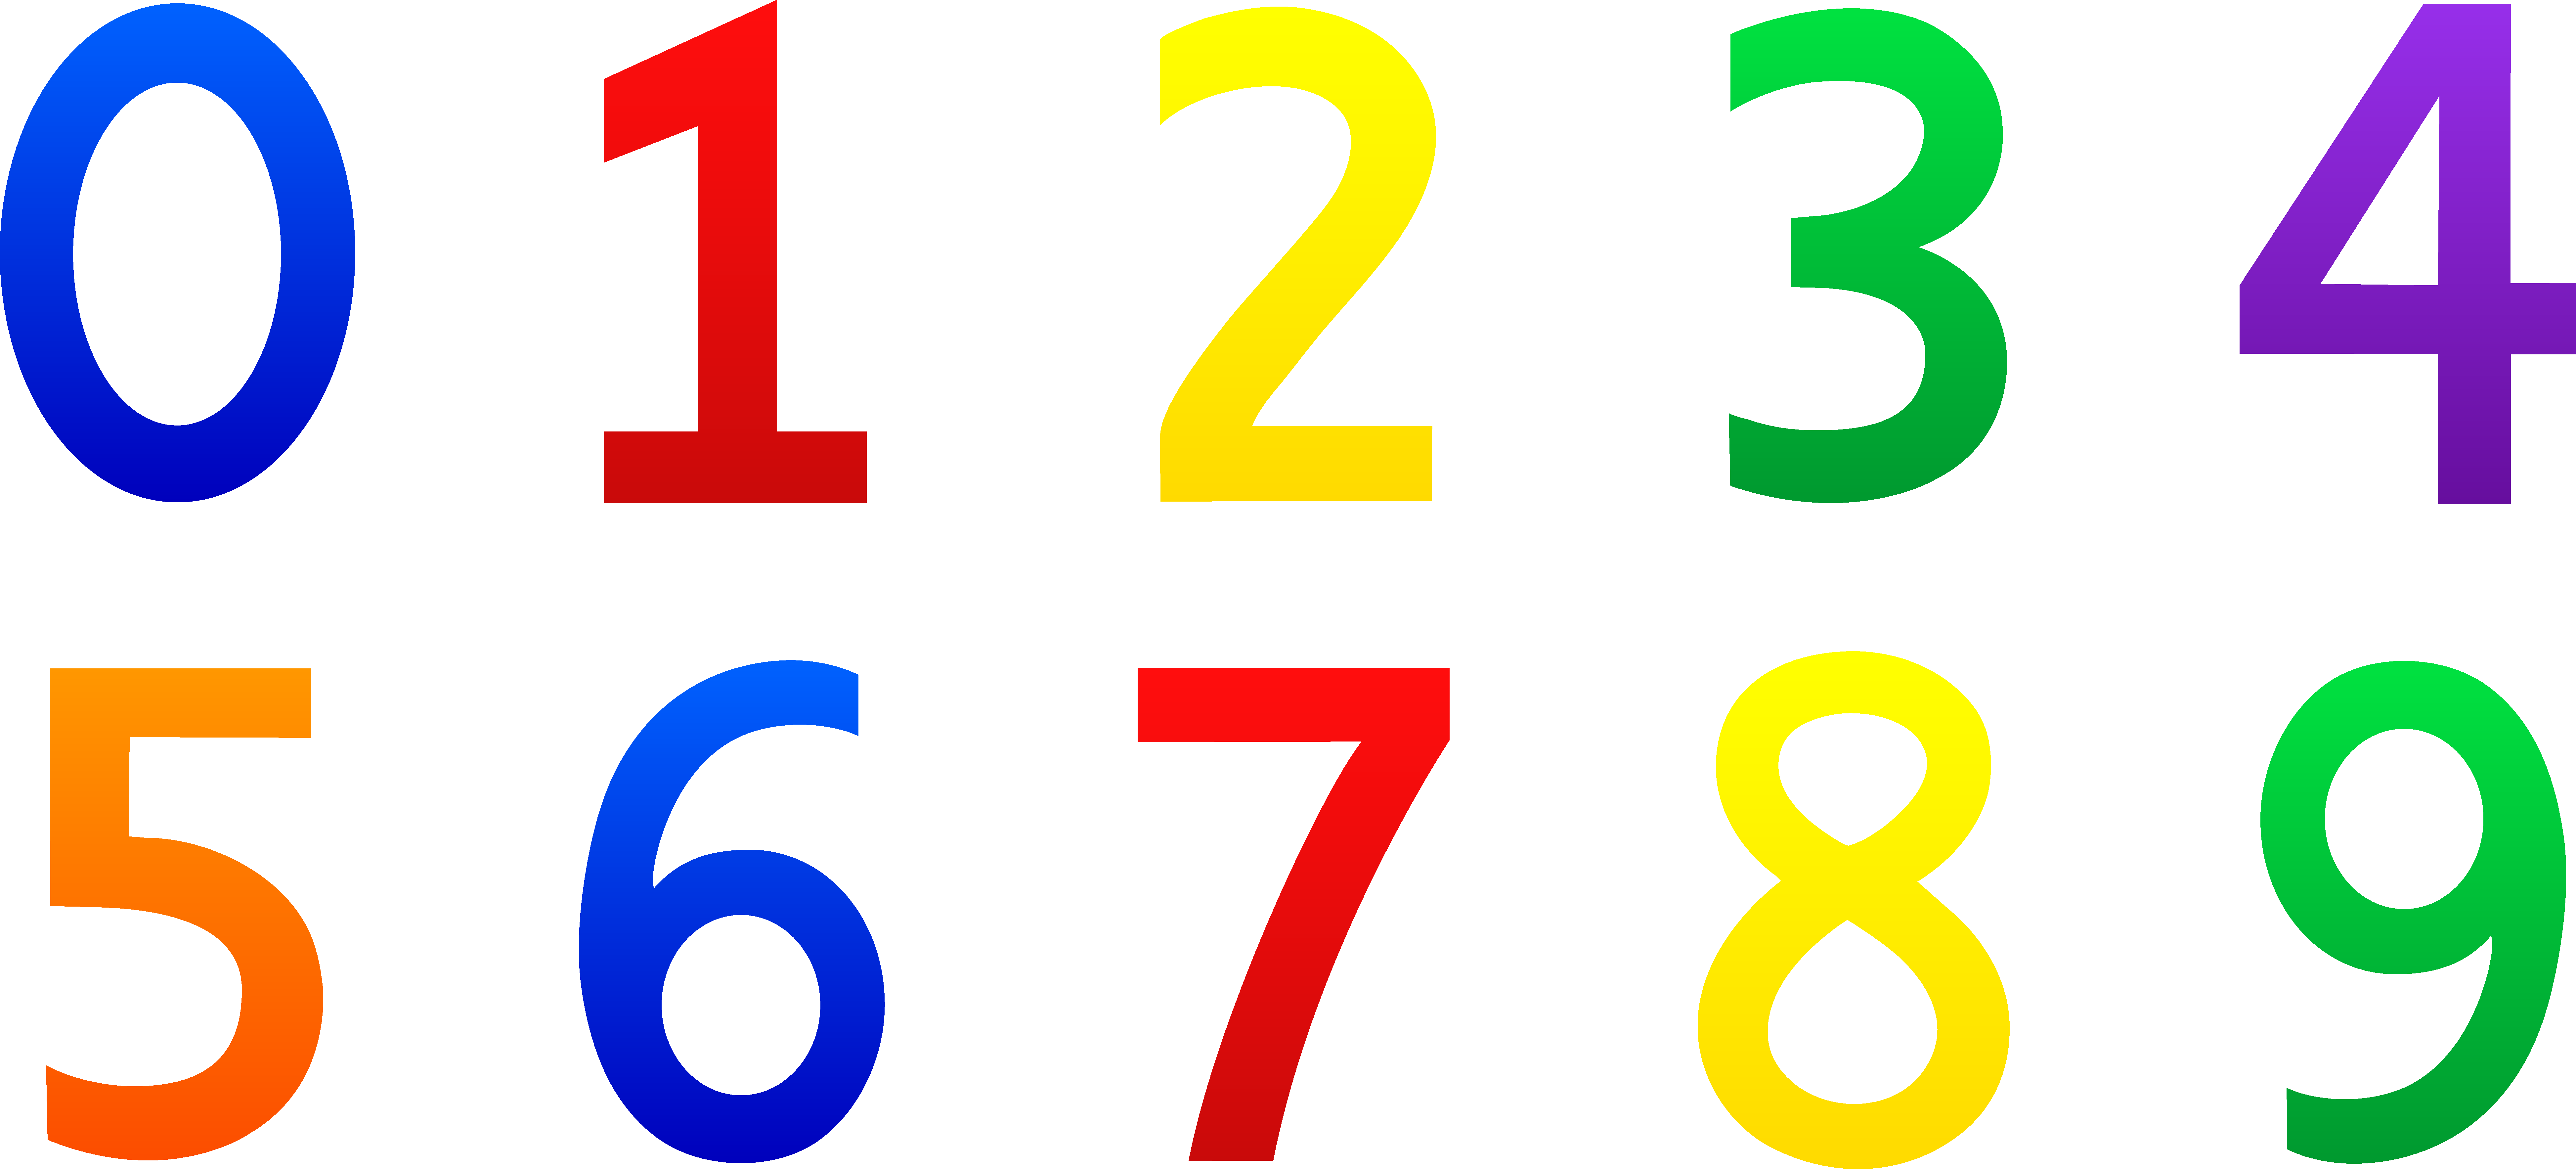 Free images numbers.